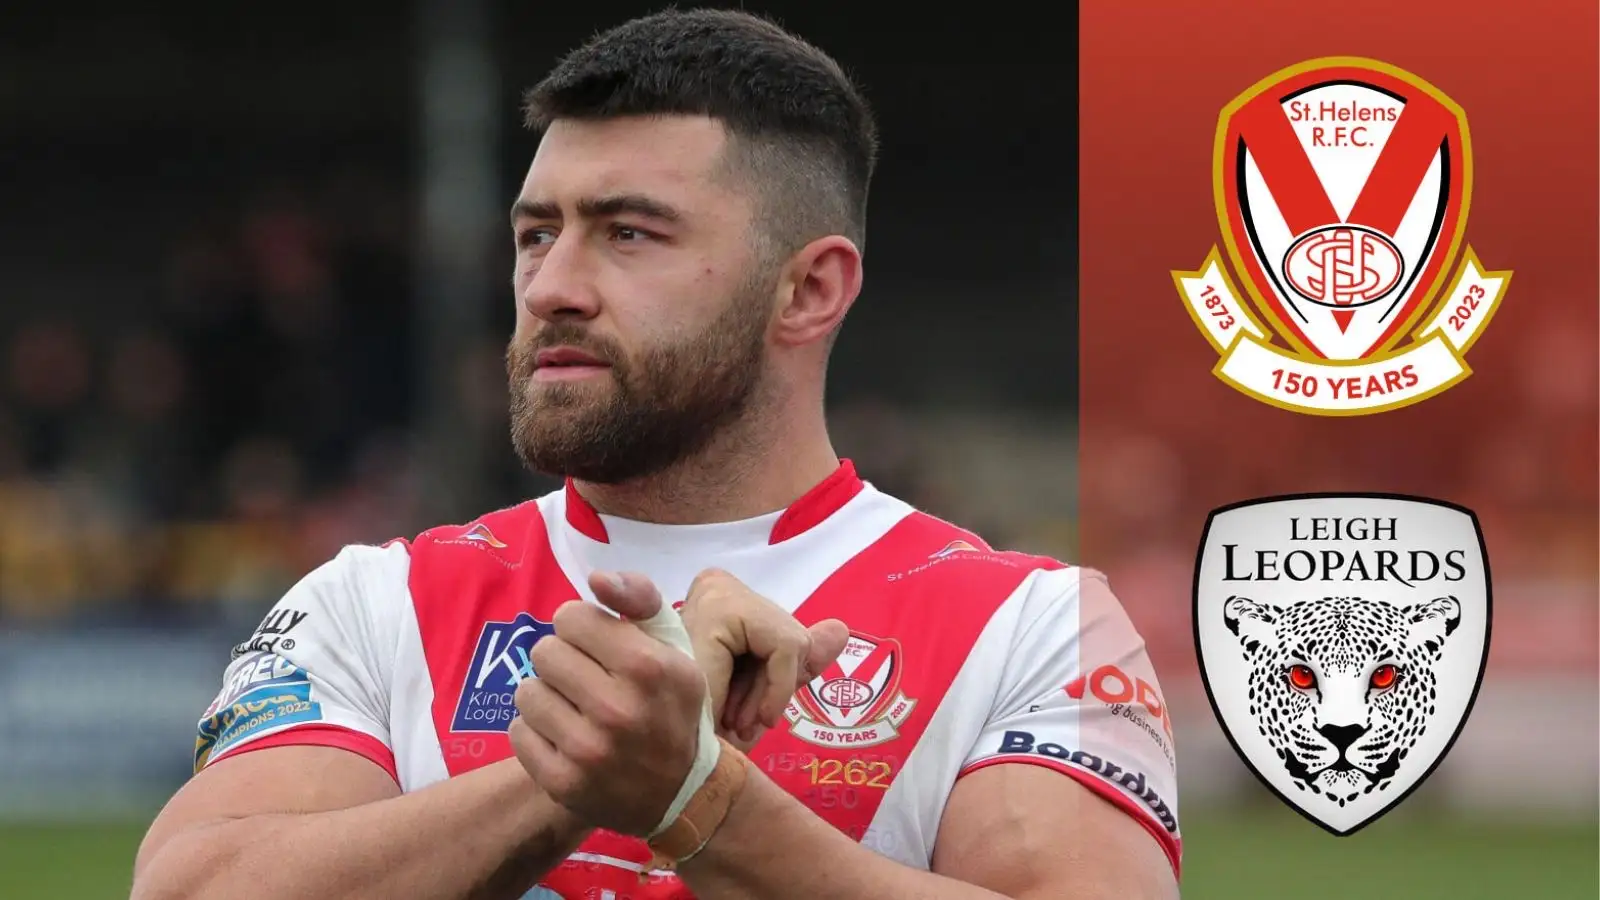 St Helens: Paul Wellens explains why they recalled prop from Leigh Leopards loan